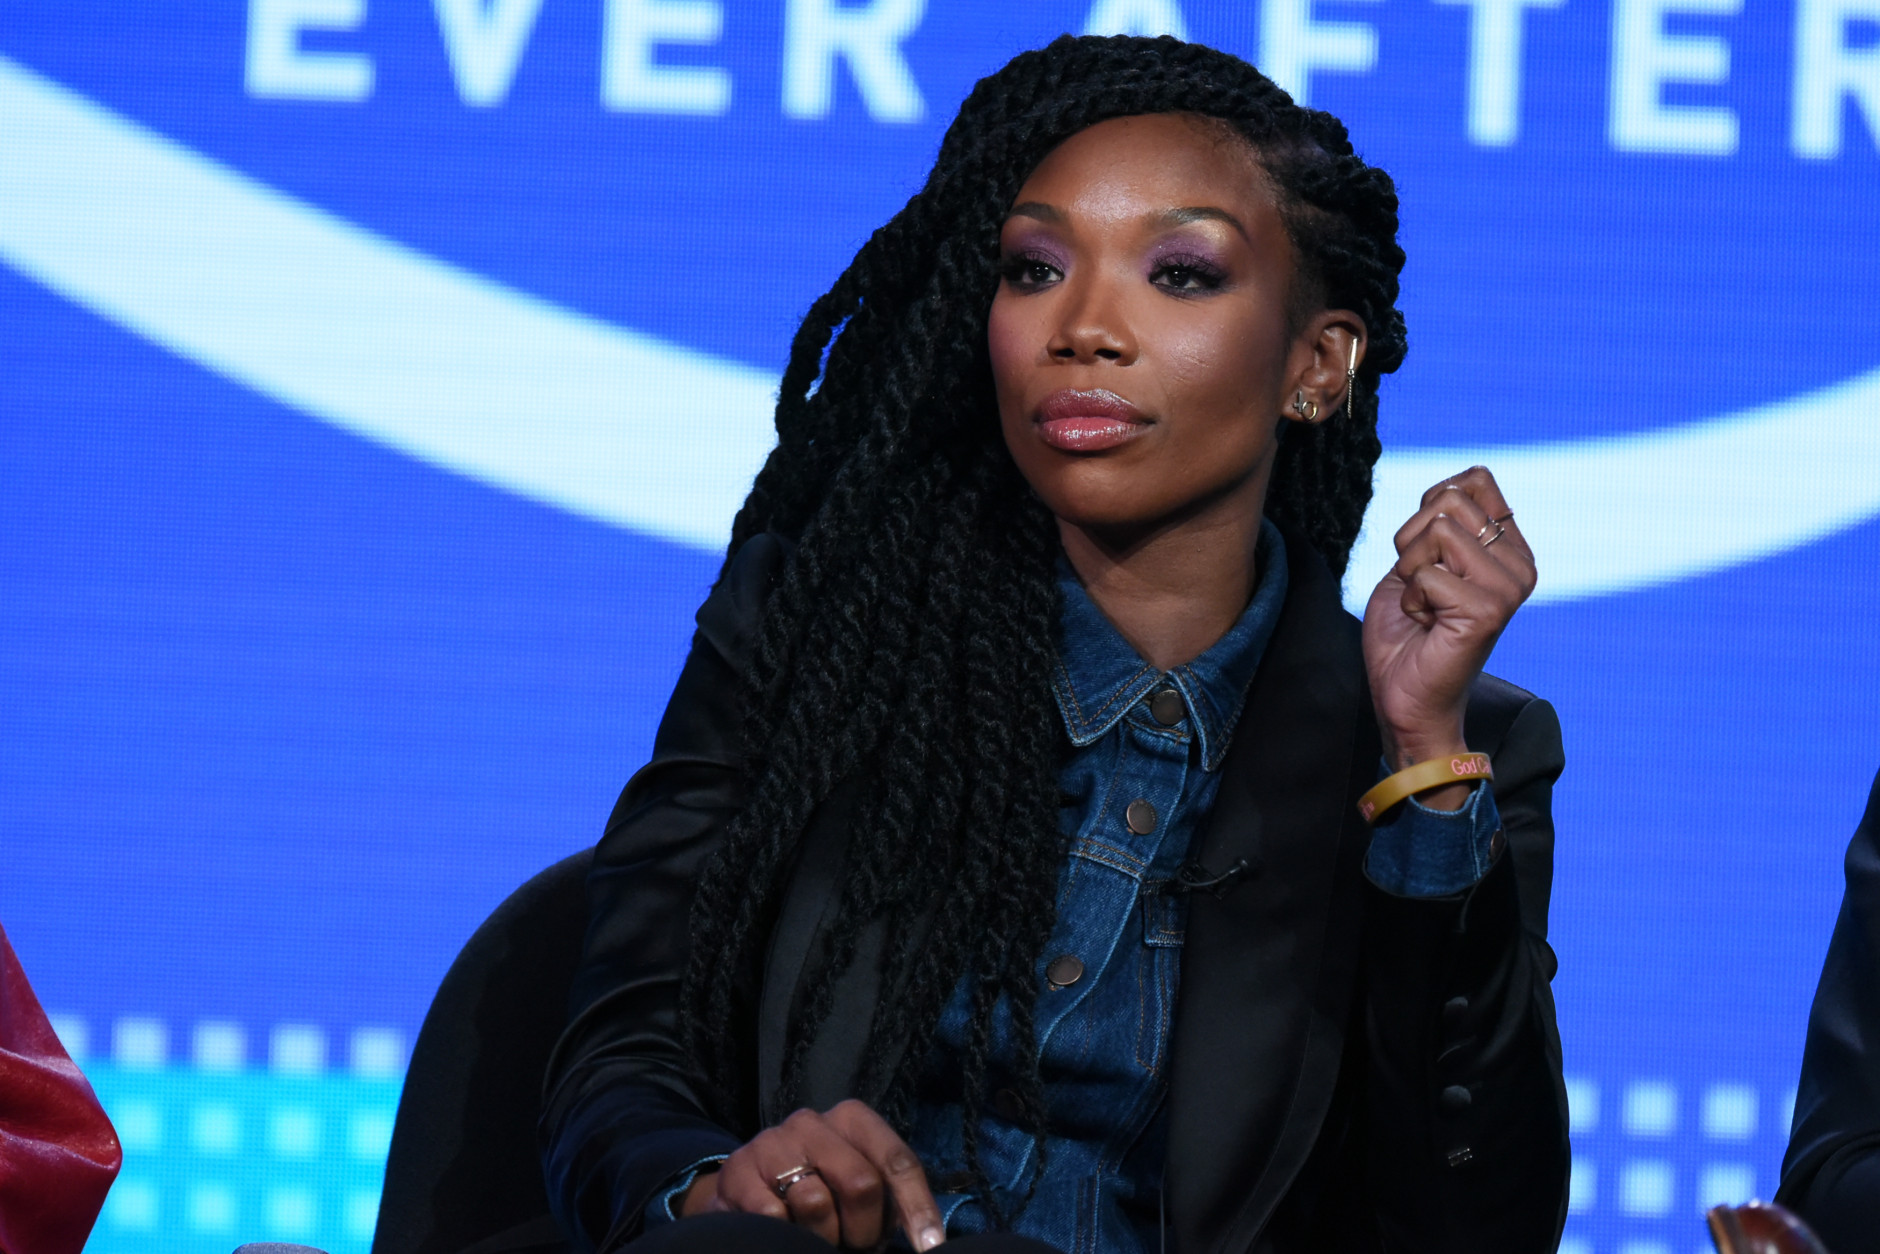 Recording artist and actress Brandy Norwood speaks on stage during the "Zoe Ever After" panel at the Viacom 2016 Winter TCA on Wednesday, Jan. 6, 2016, in Pasadena, Calif. (Photo by Richard Shotwell/Invision/AP)